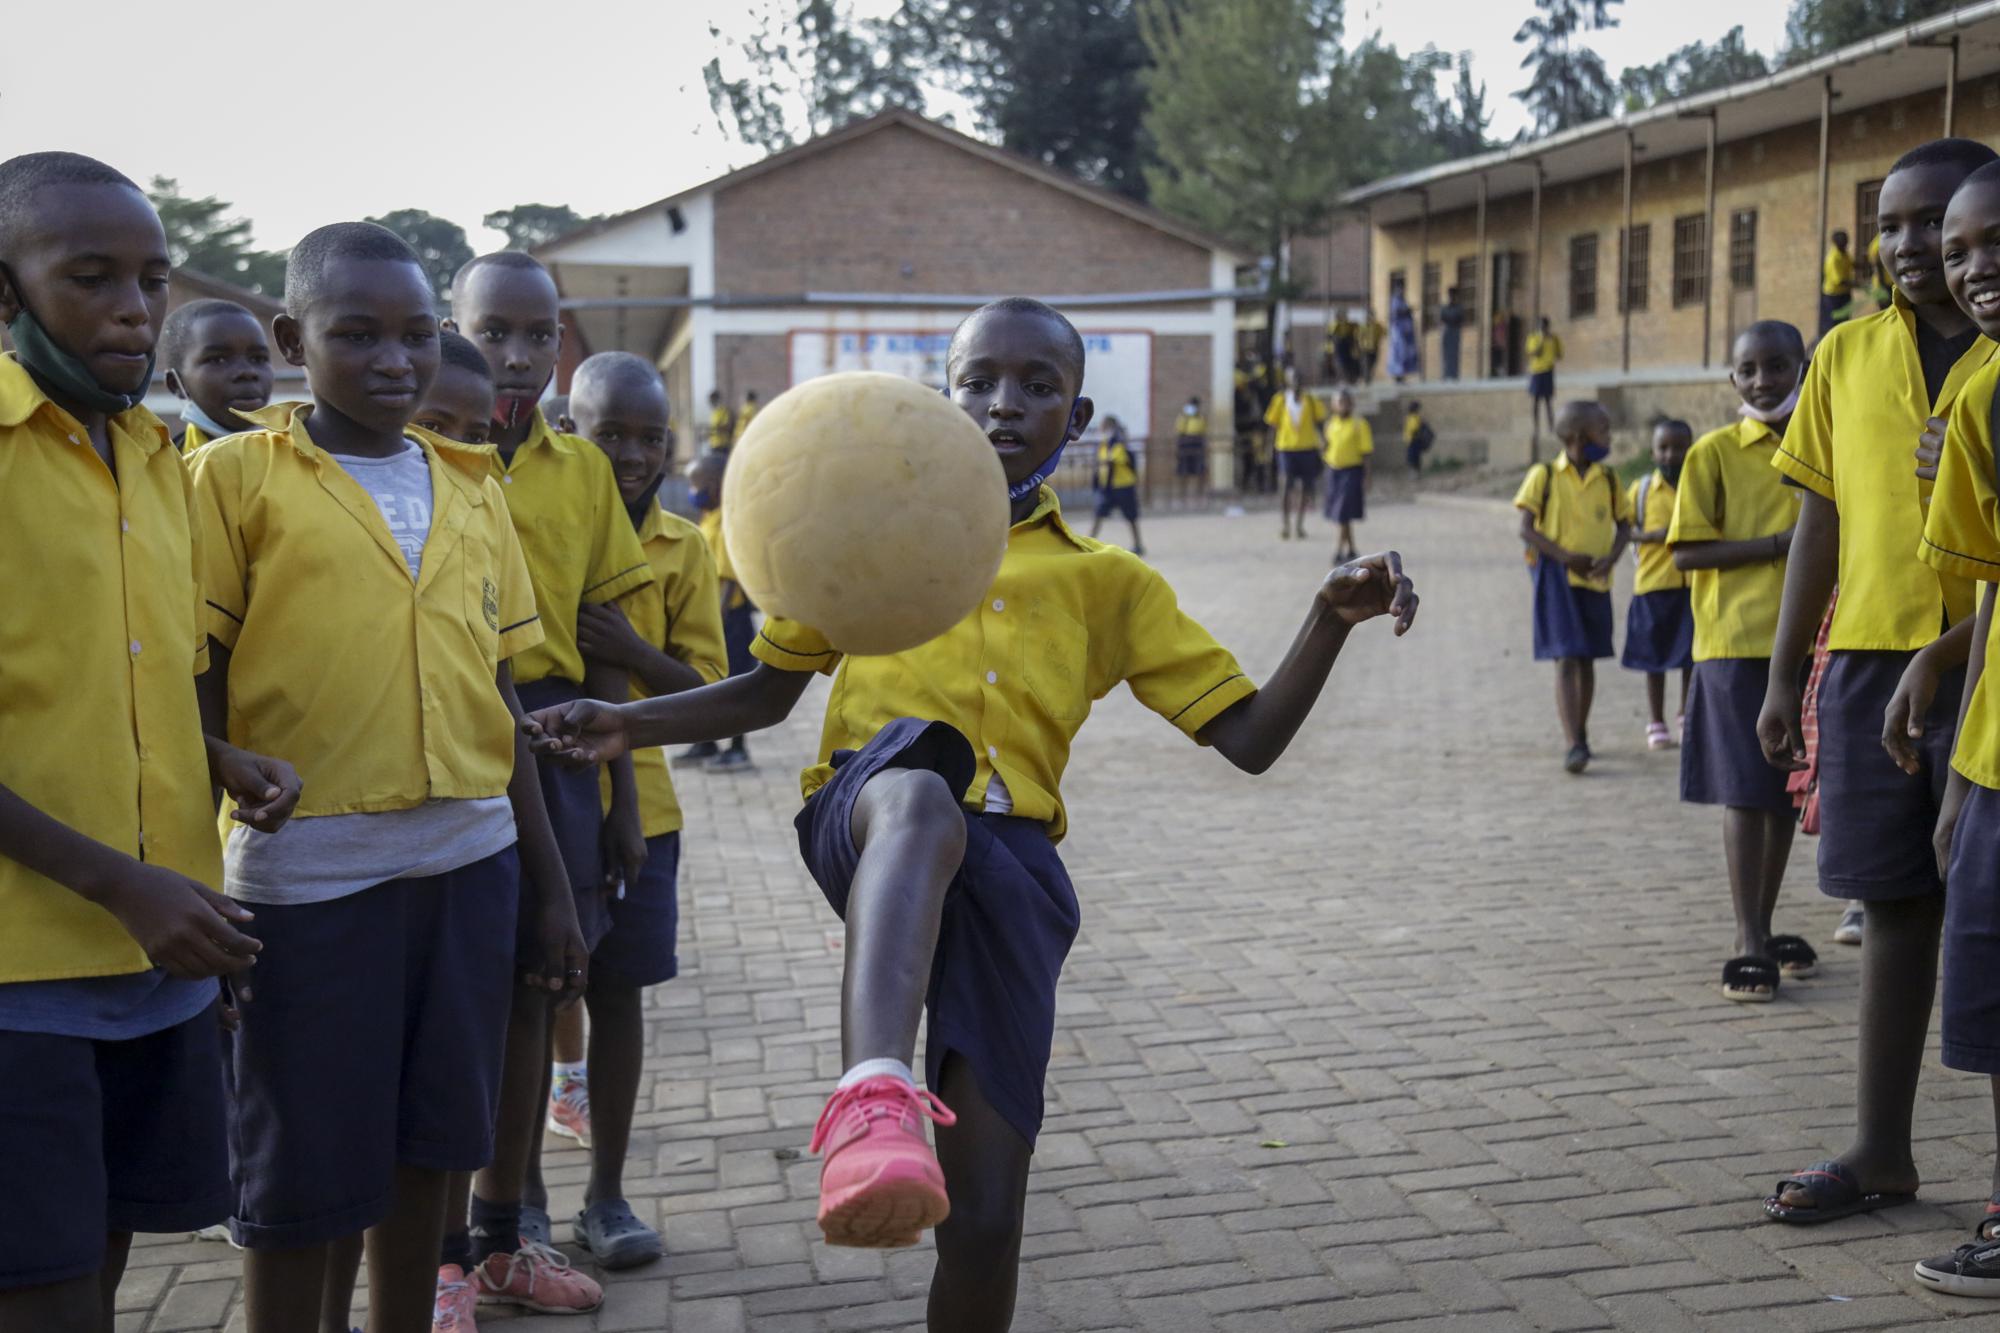 Tresor Ndizihiwe plays soccer with his friends after school at the Kimihurura Primary School in Kigali, Rwanda, on Thursday, June 10, 2021. Tresor says he enjoys playing with others after months at home when he was not allowed to play with his friends or classmates because of the coronavirus pandemic. (AP Photo/Muhizi Olivier)